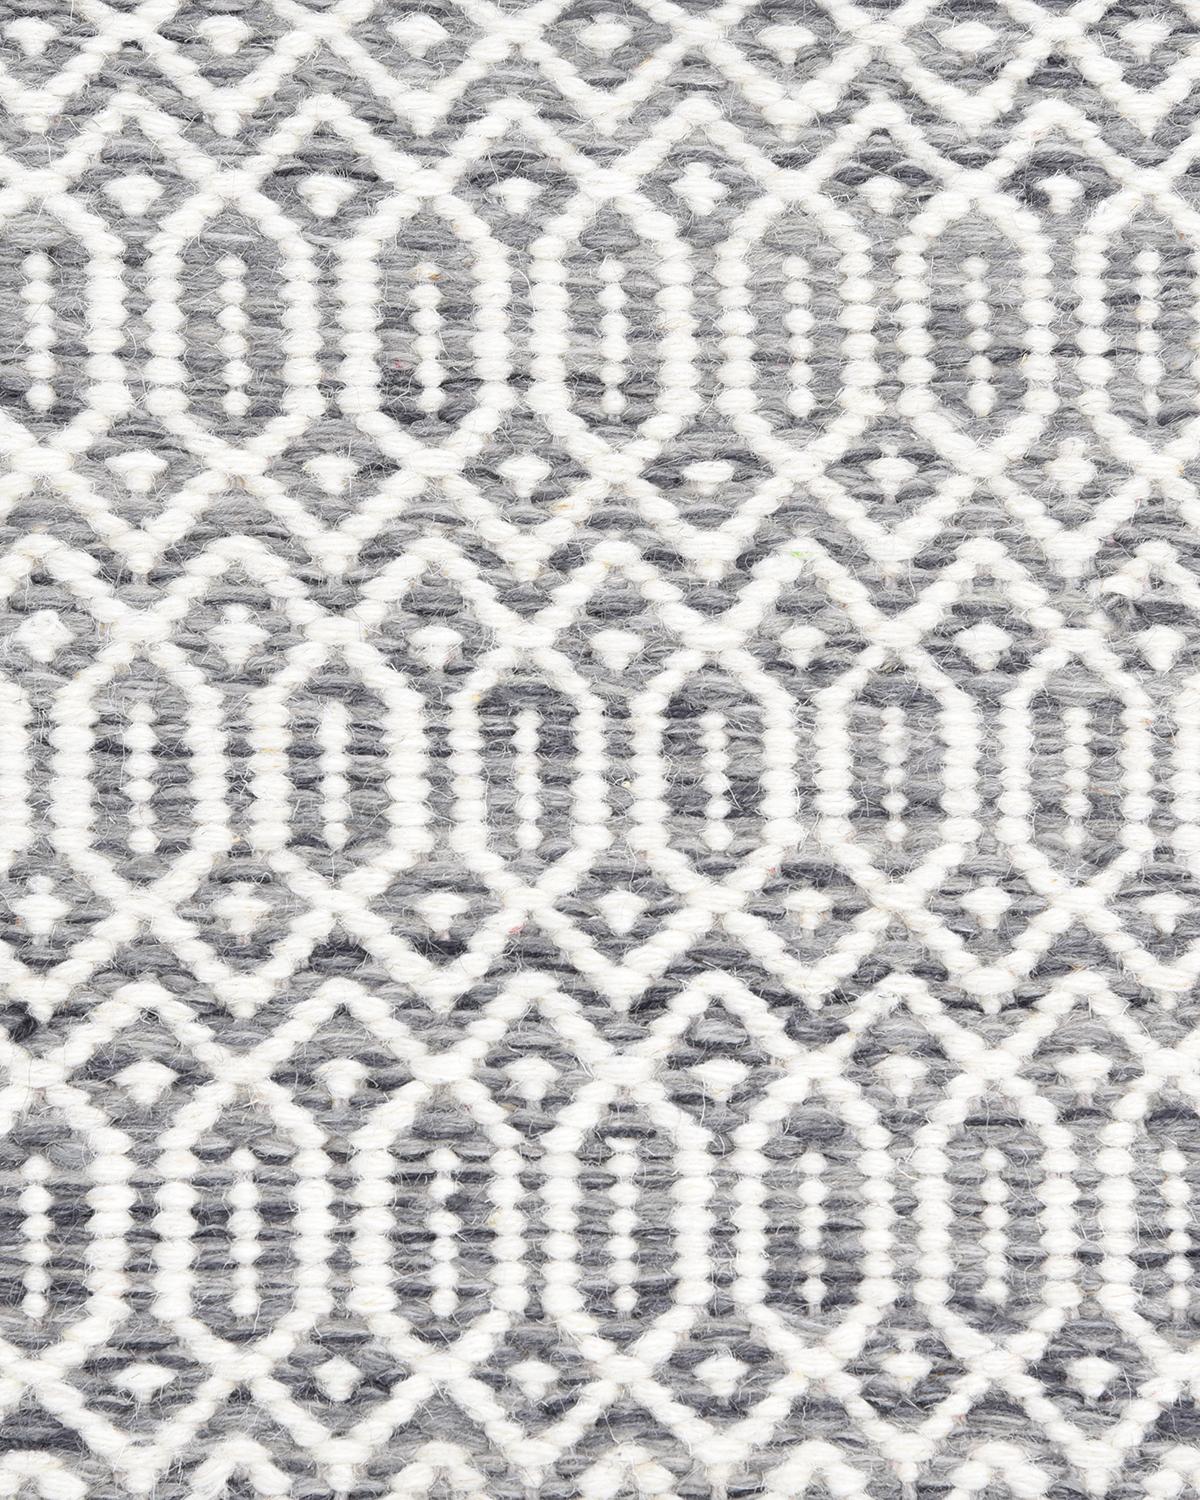 Indian Solo Rugs Flatweave Geometric Hand Woven Gray Area Rug For Sale